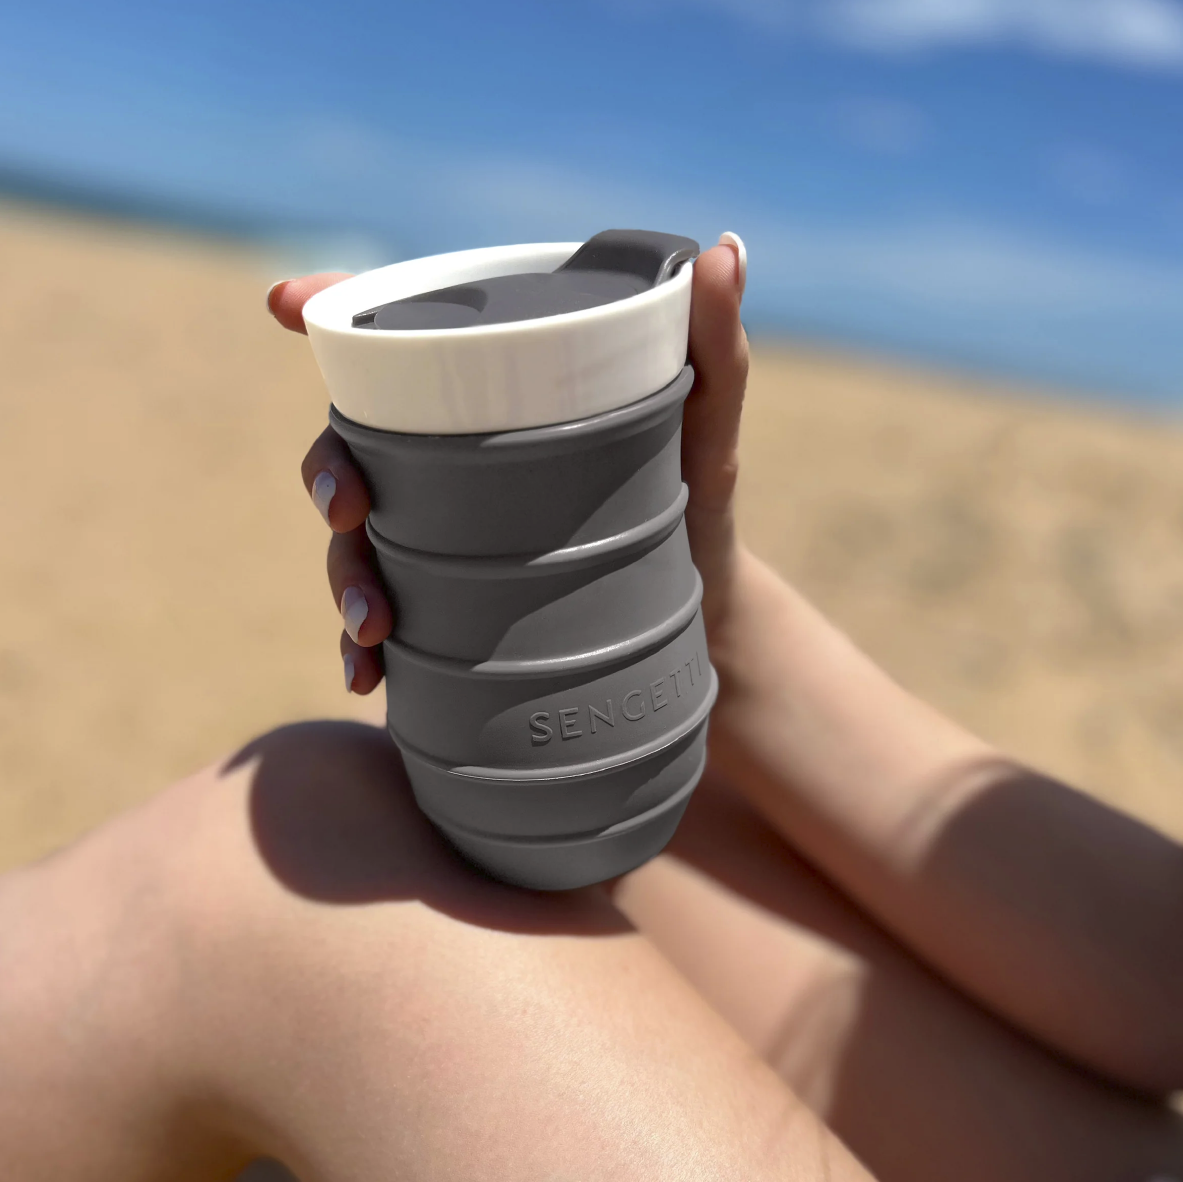 On-The-Go Tumbler - Charcoal